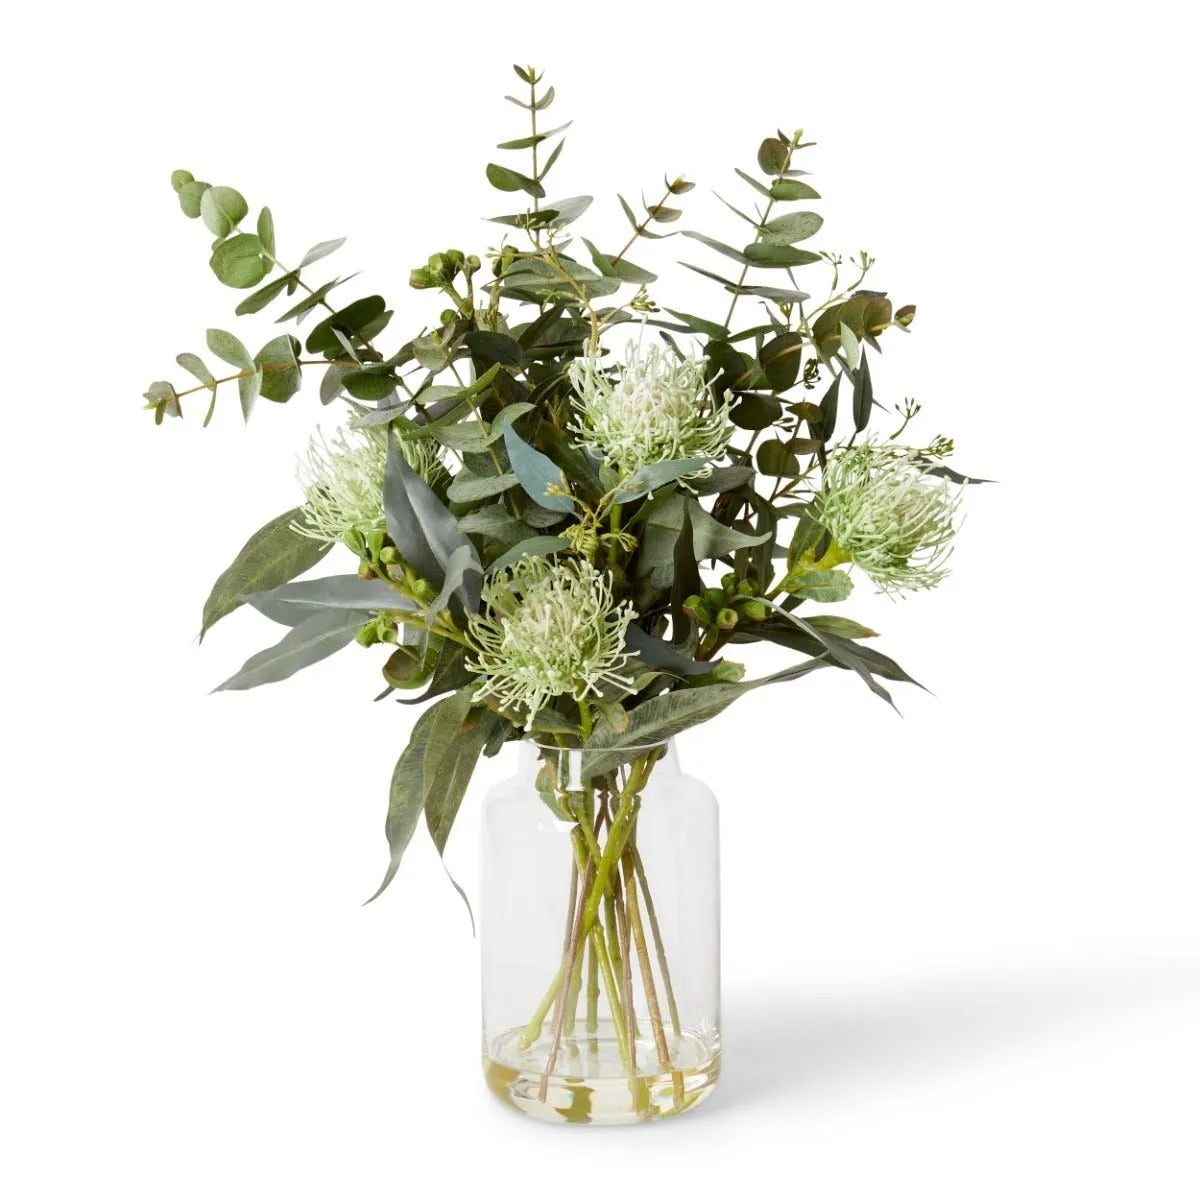 This Pin Cushion Mix Tillie Vase Green is perfect for adding a touch of floral and greenery to any interior. The remarkably realistic design is 57cm tall and requires no watering - providing a convenient and beautiful accent to any space.